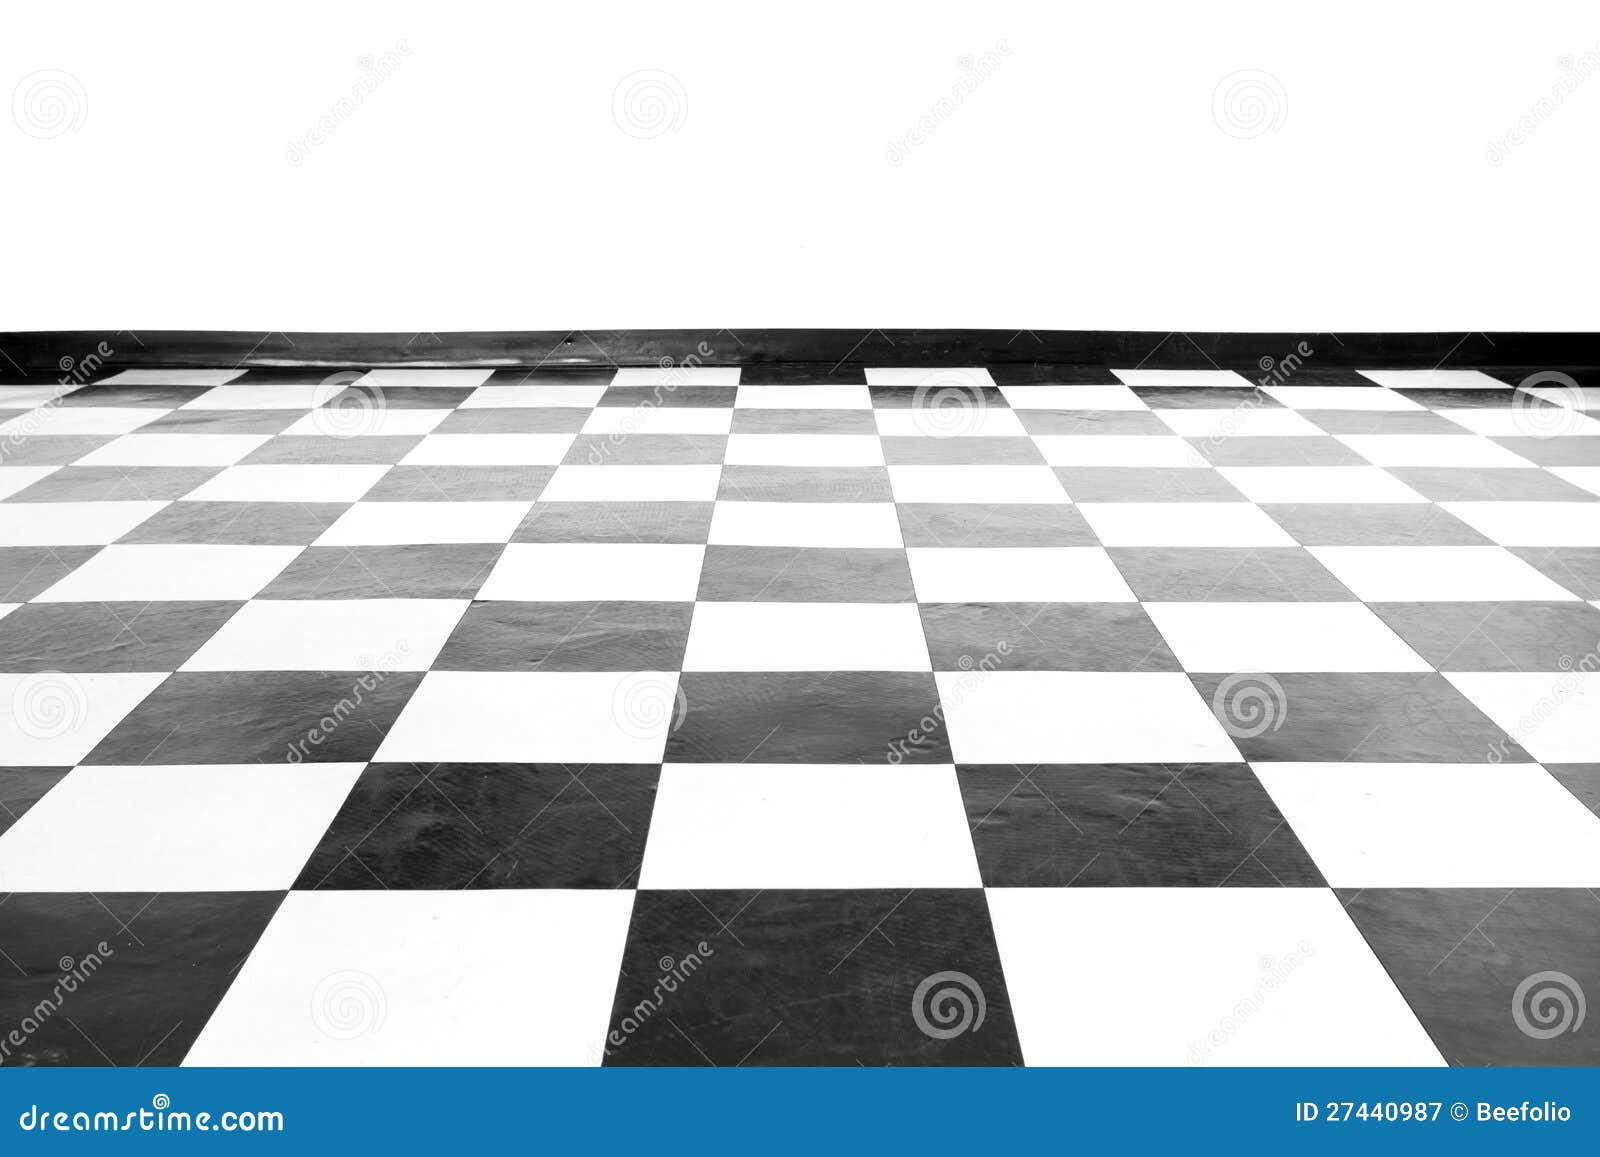 Vintage Square Black and White Floor Stock Image - Image of classic ...